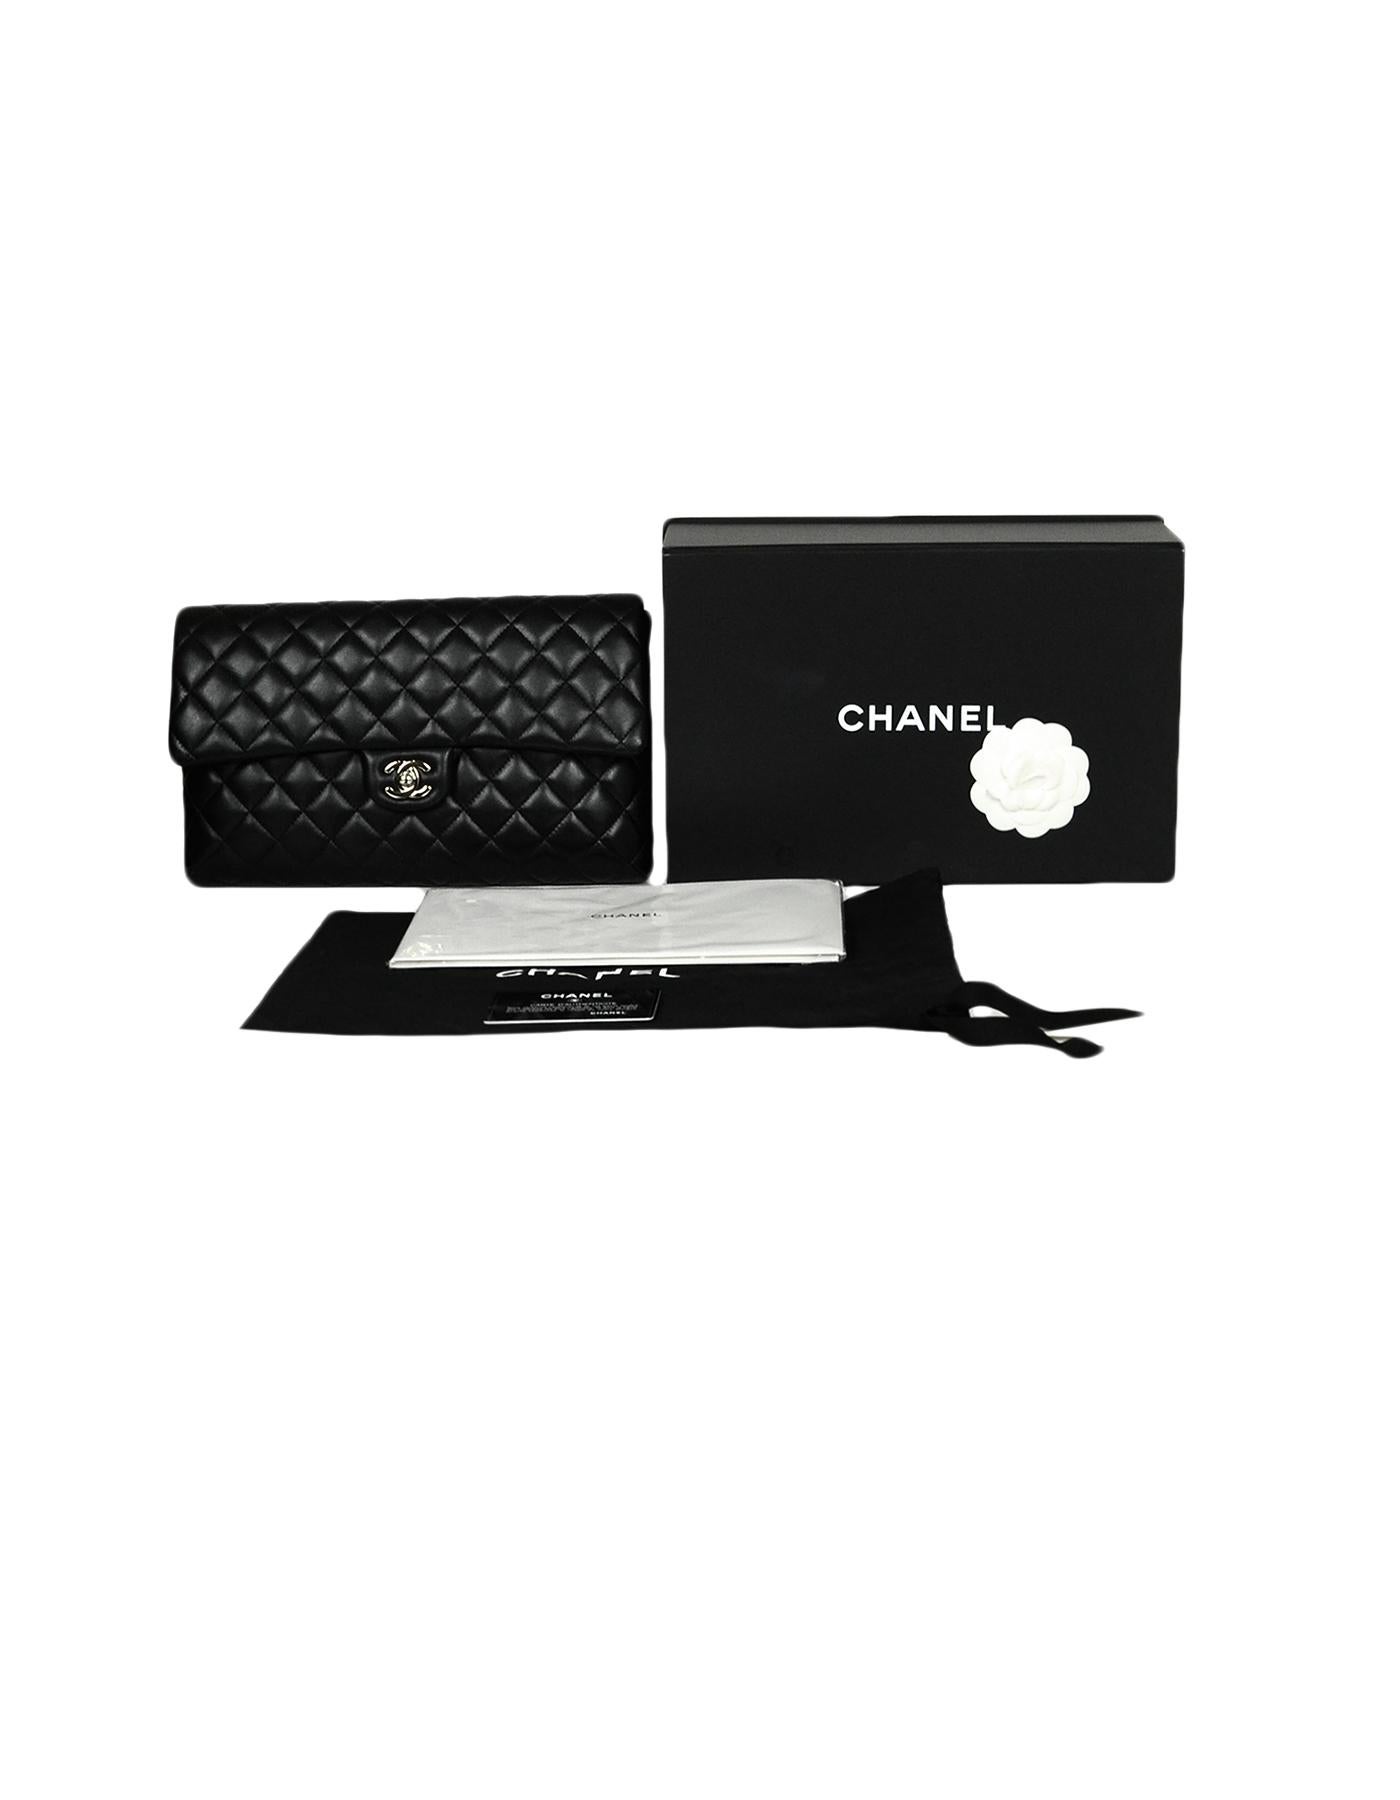 Chanel 2019 Black Lambskin Leather Quilted Classic Flap Clutch Bag 2